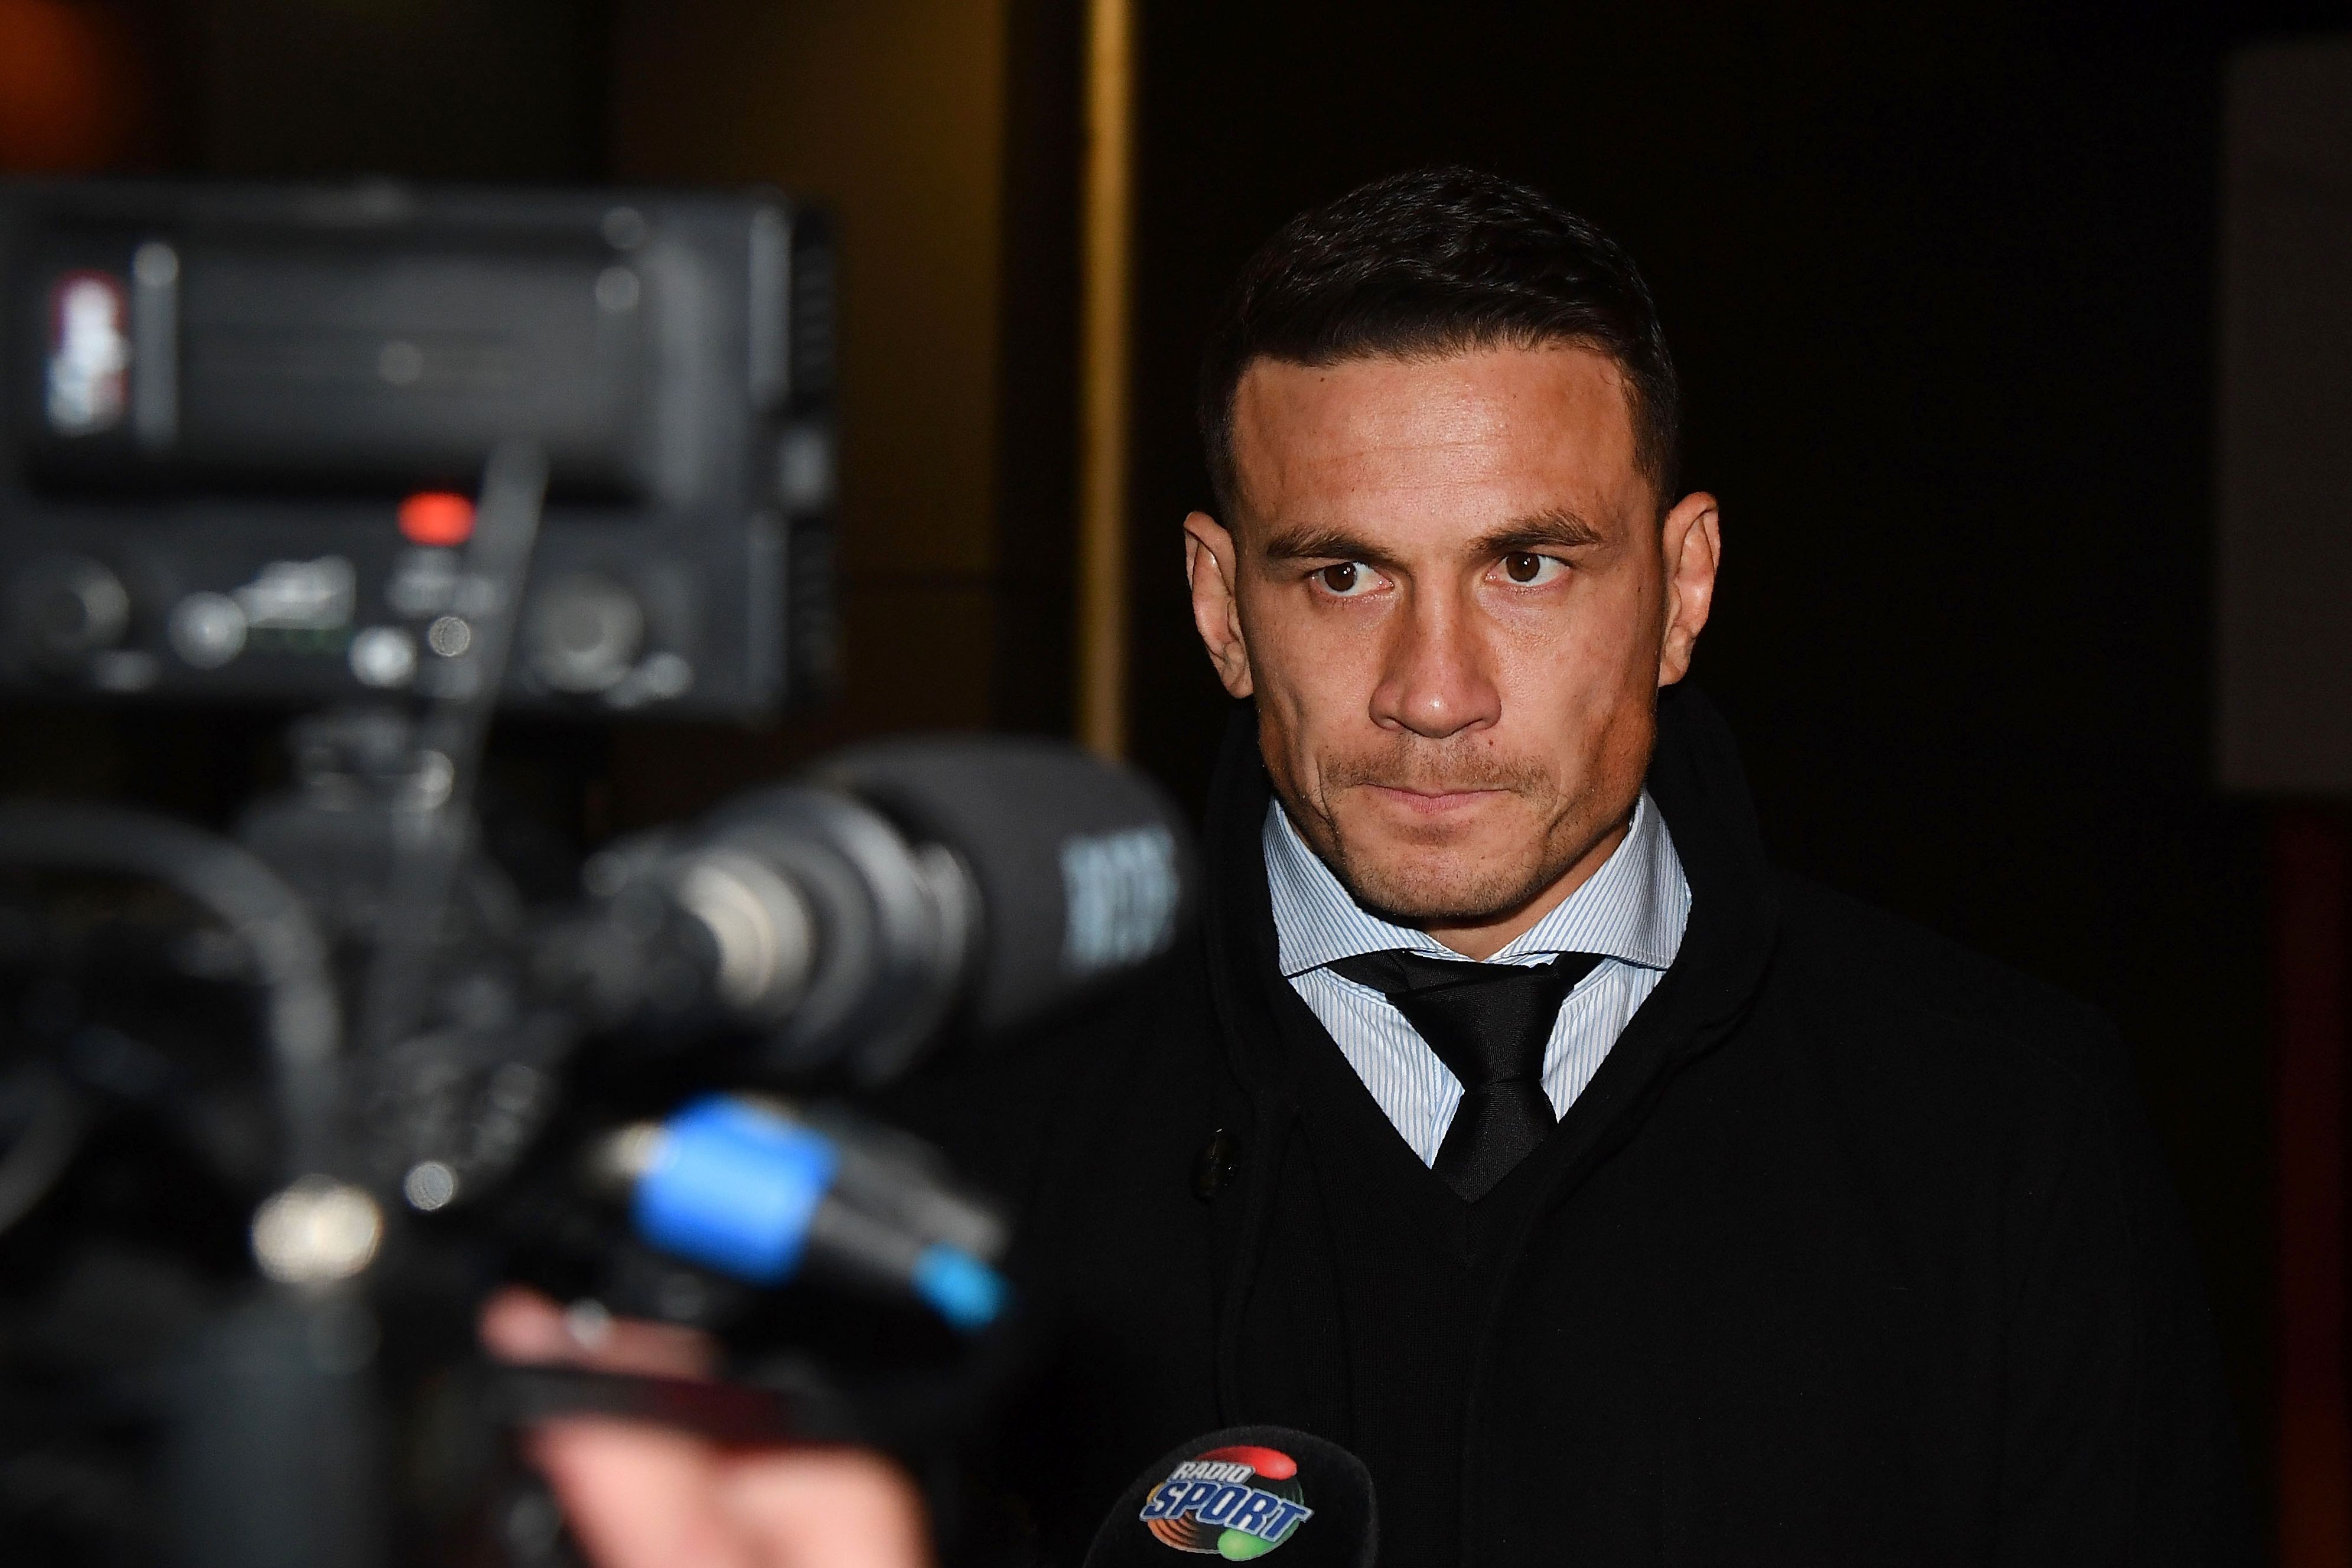 Sonny Bill Williams speaks to the media outside the NZRU Headquarters after his judicial hearing in Wellington. Photo: AFP